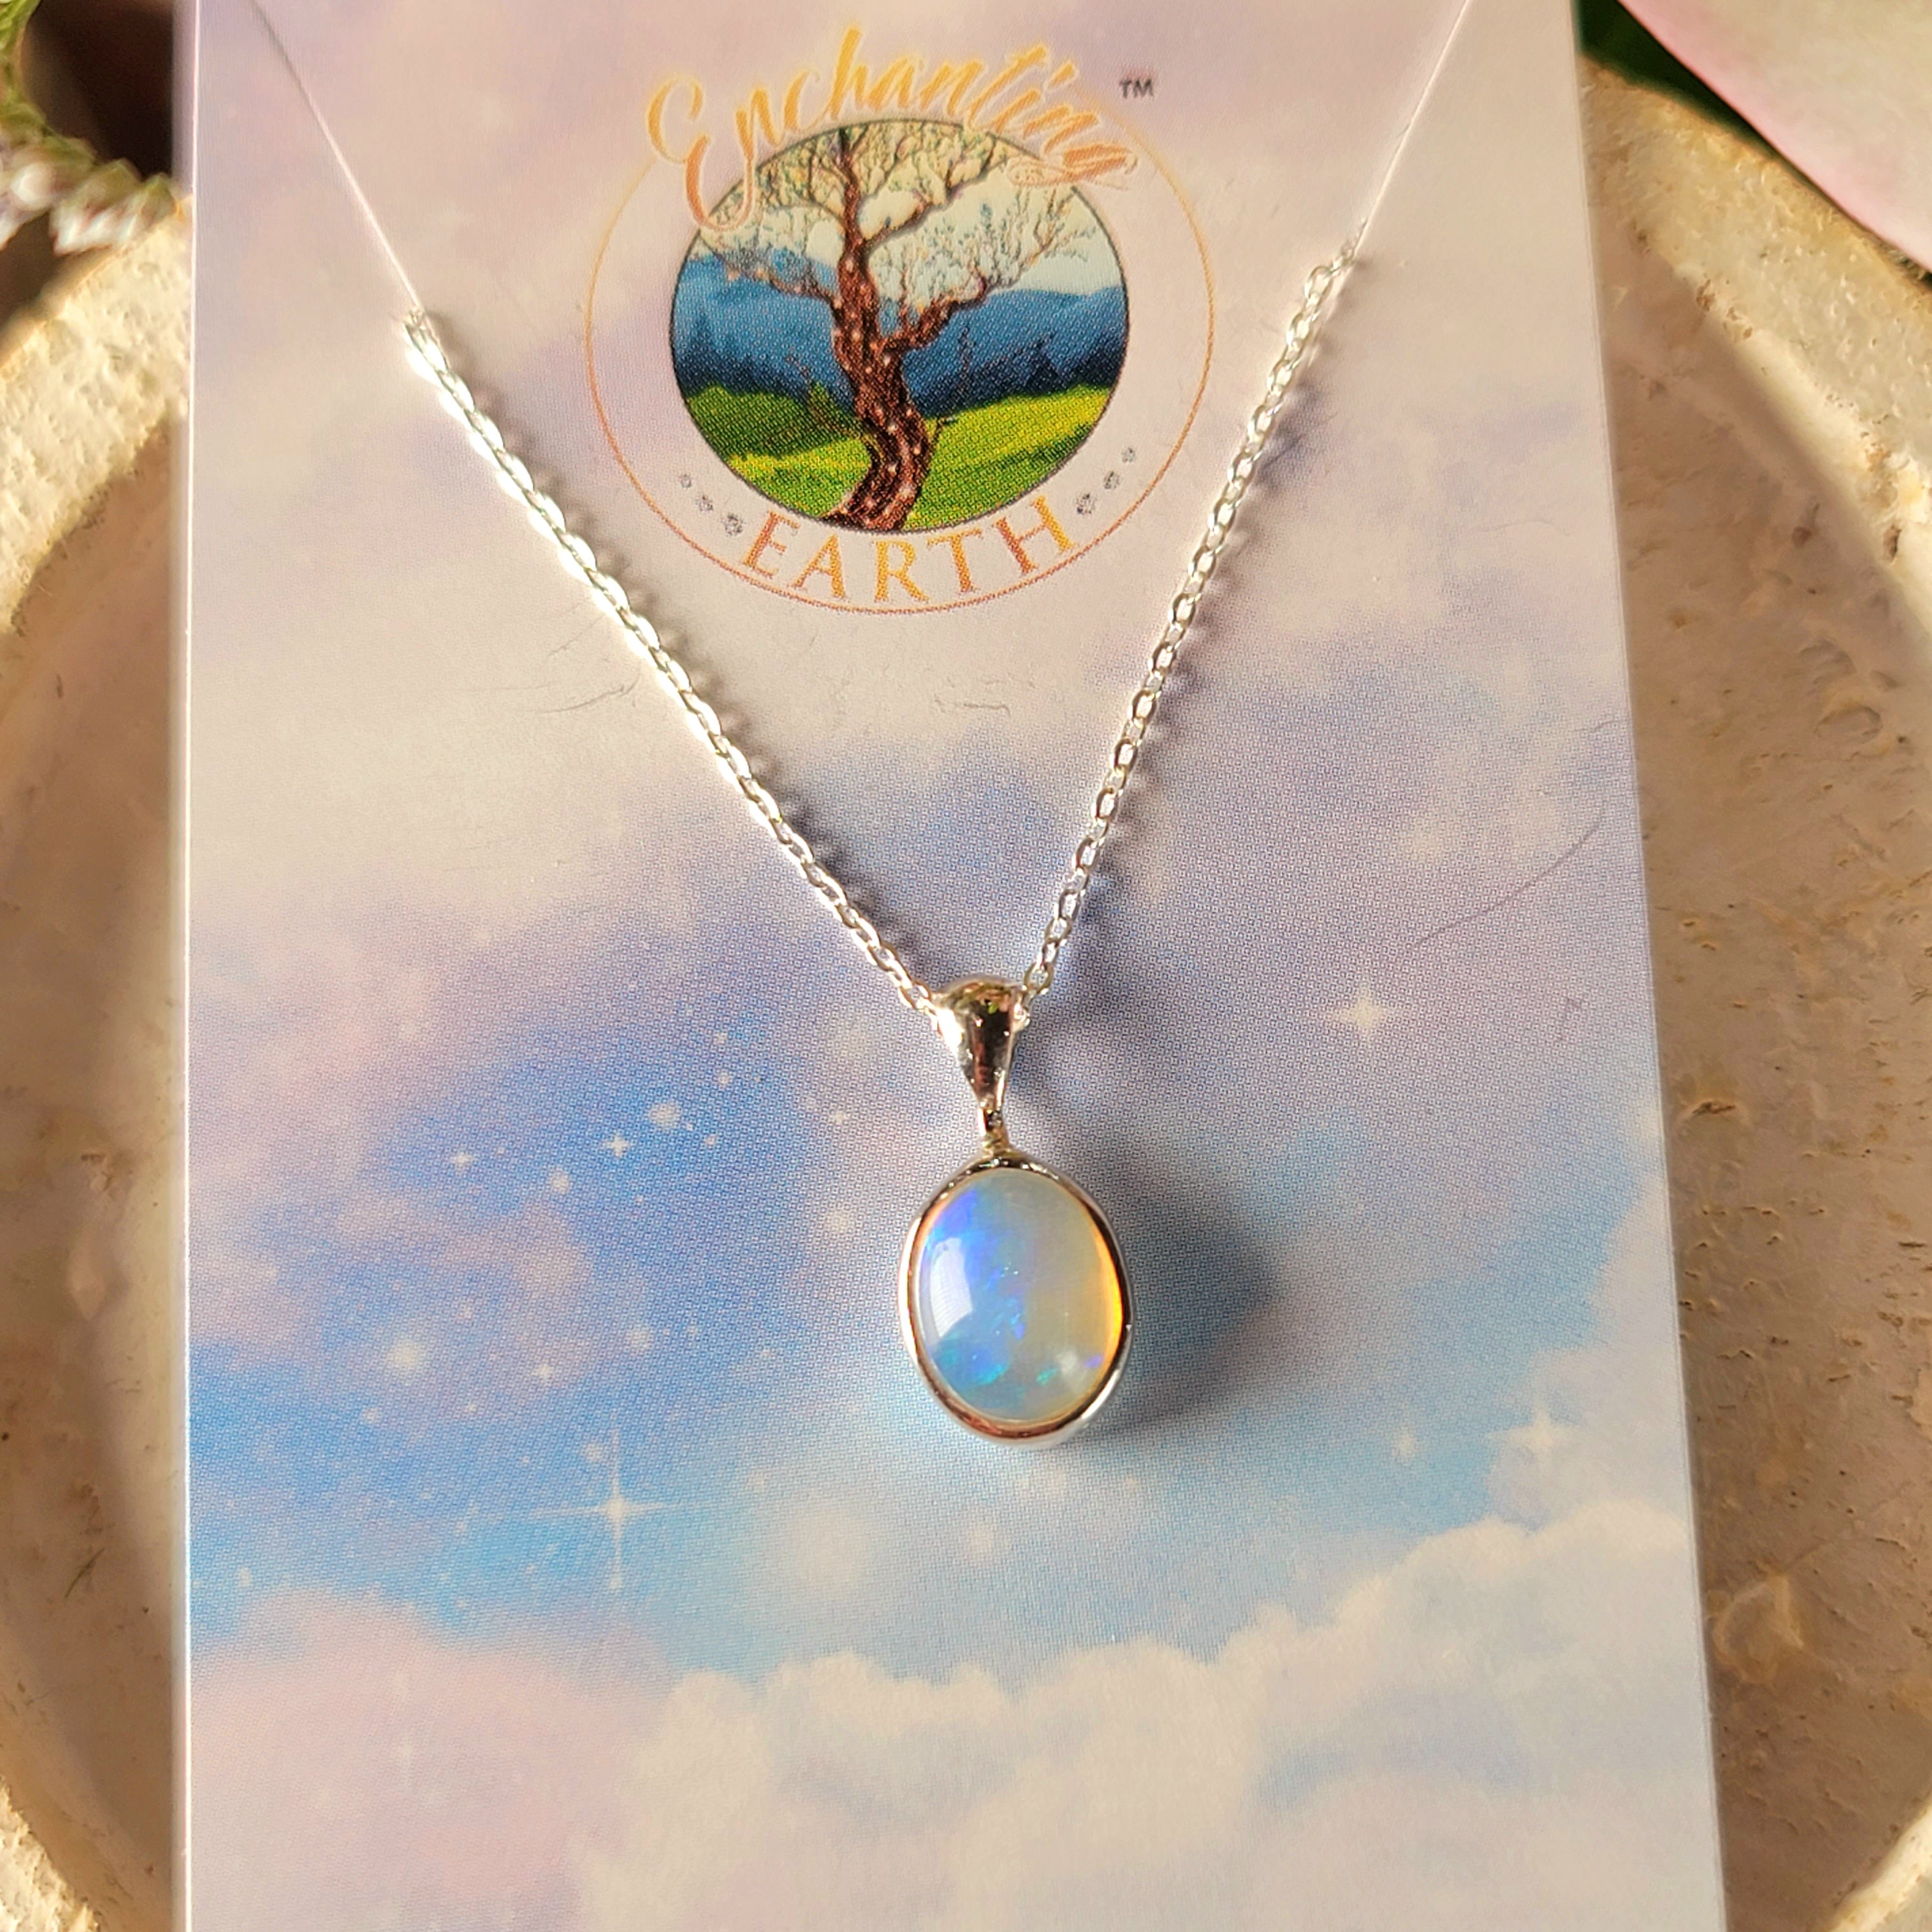 Ethiopian Opal Necklace .925 Silver for Creativity, Joy and Self Discovery